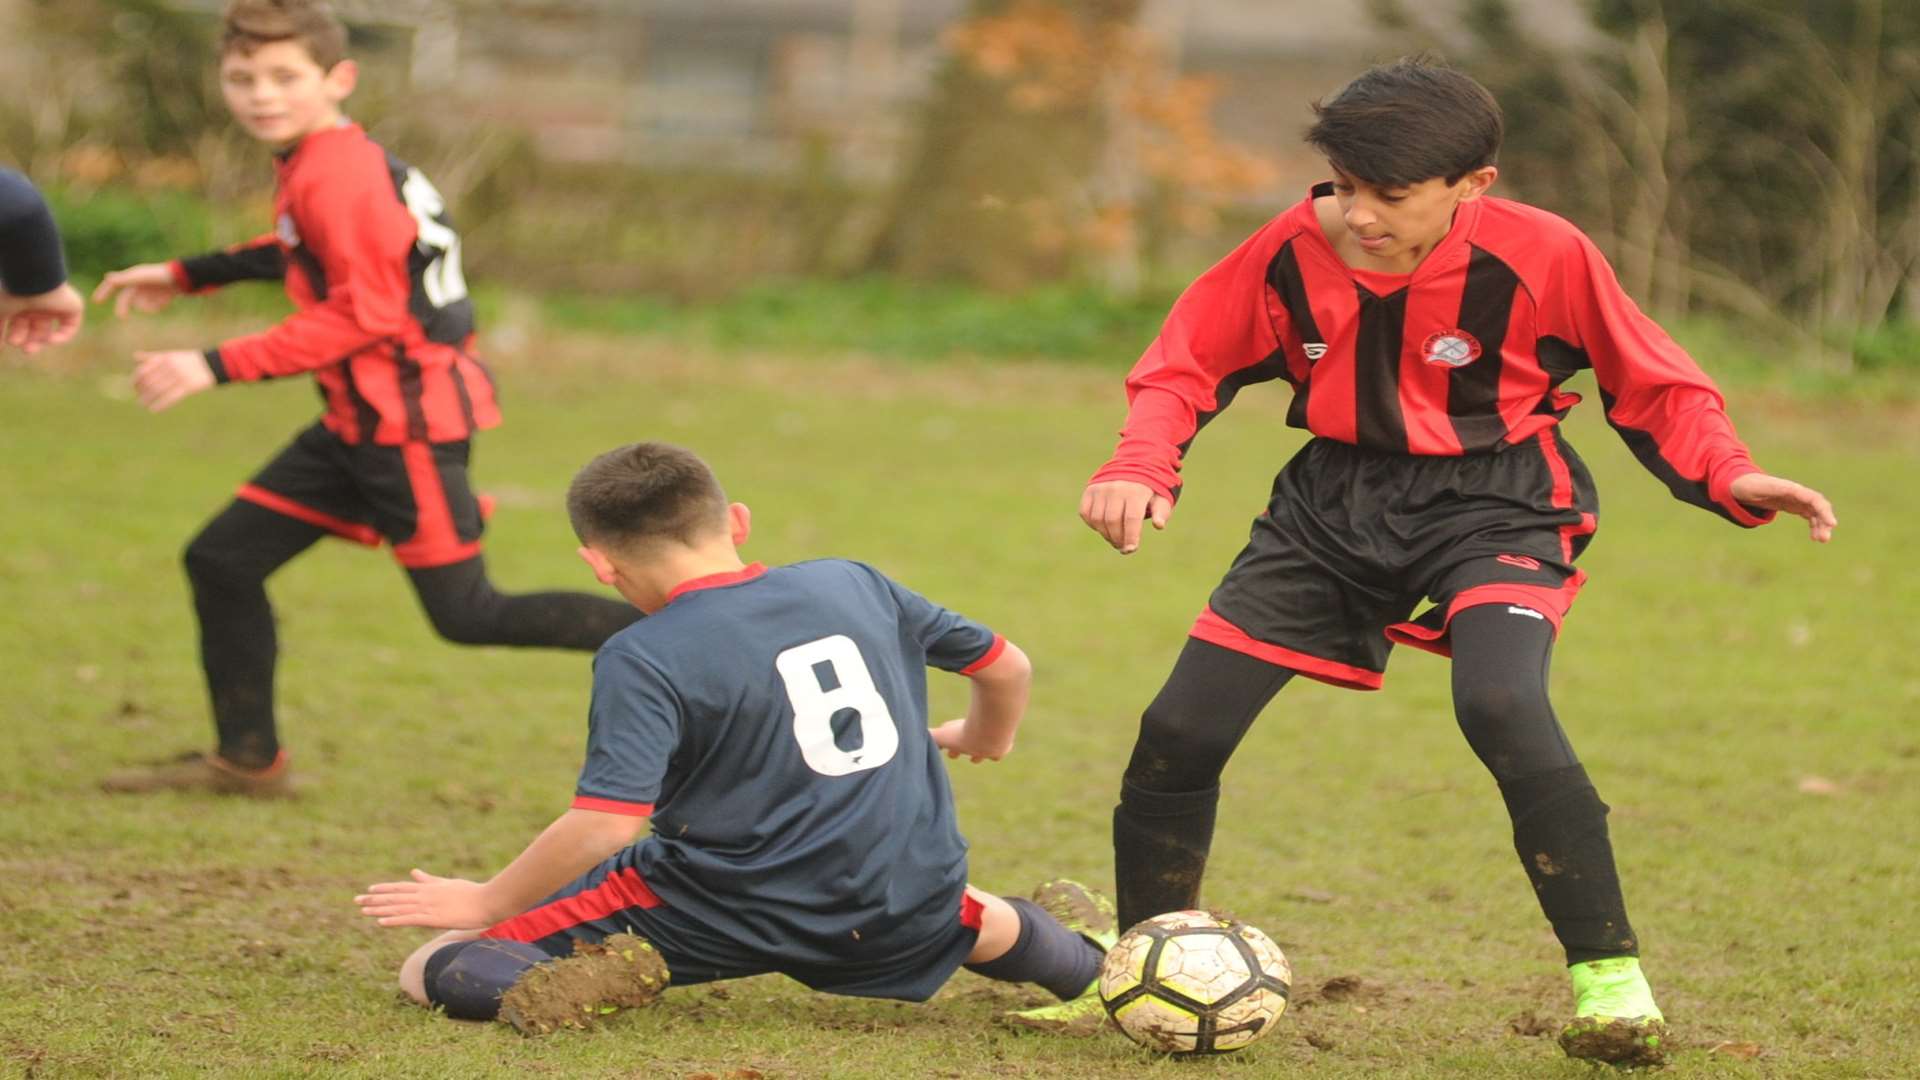 Meopham Colts Reds challenged by Hempstead Valley Colts in Under-12 Division 3 Picture: Steve Crispe